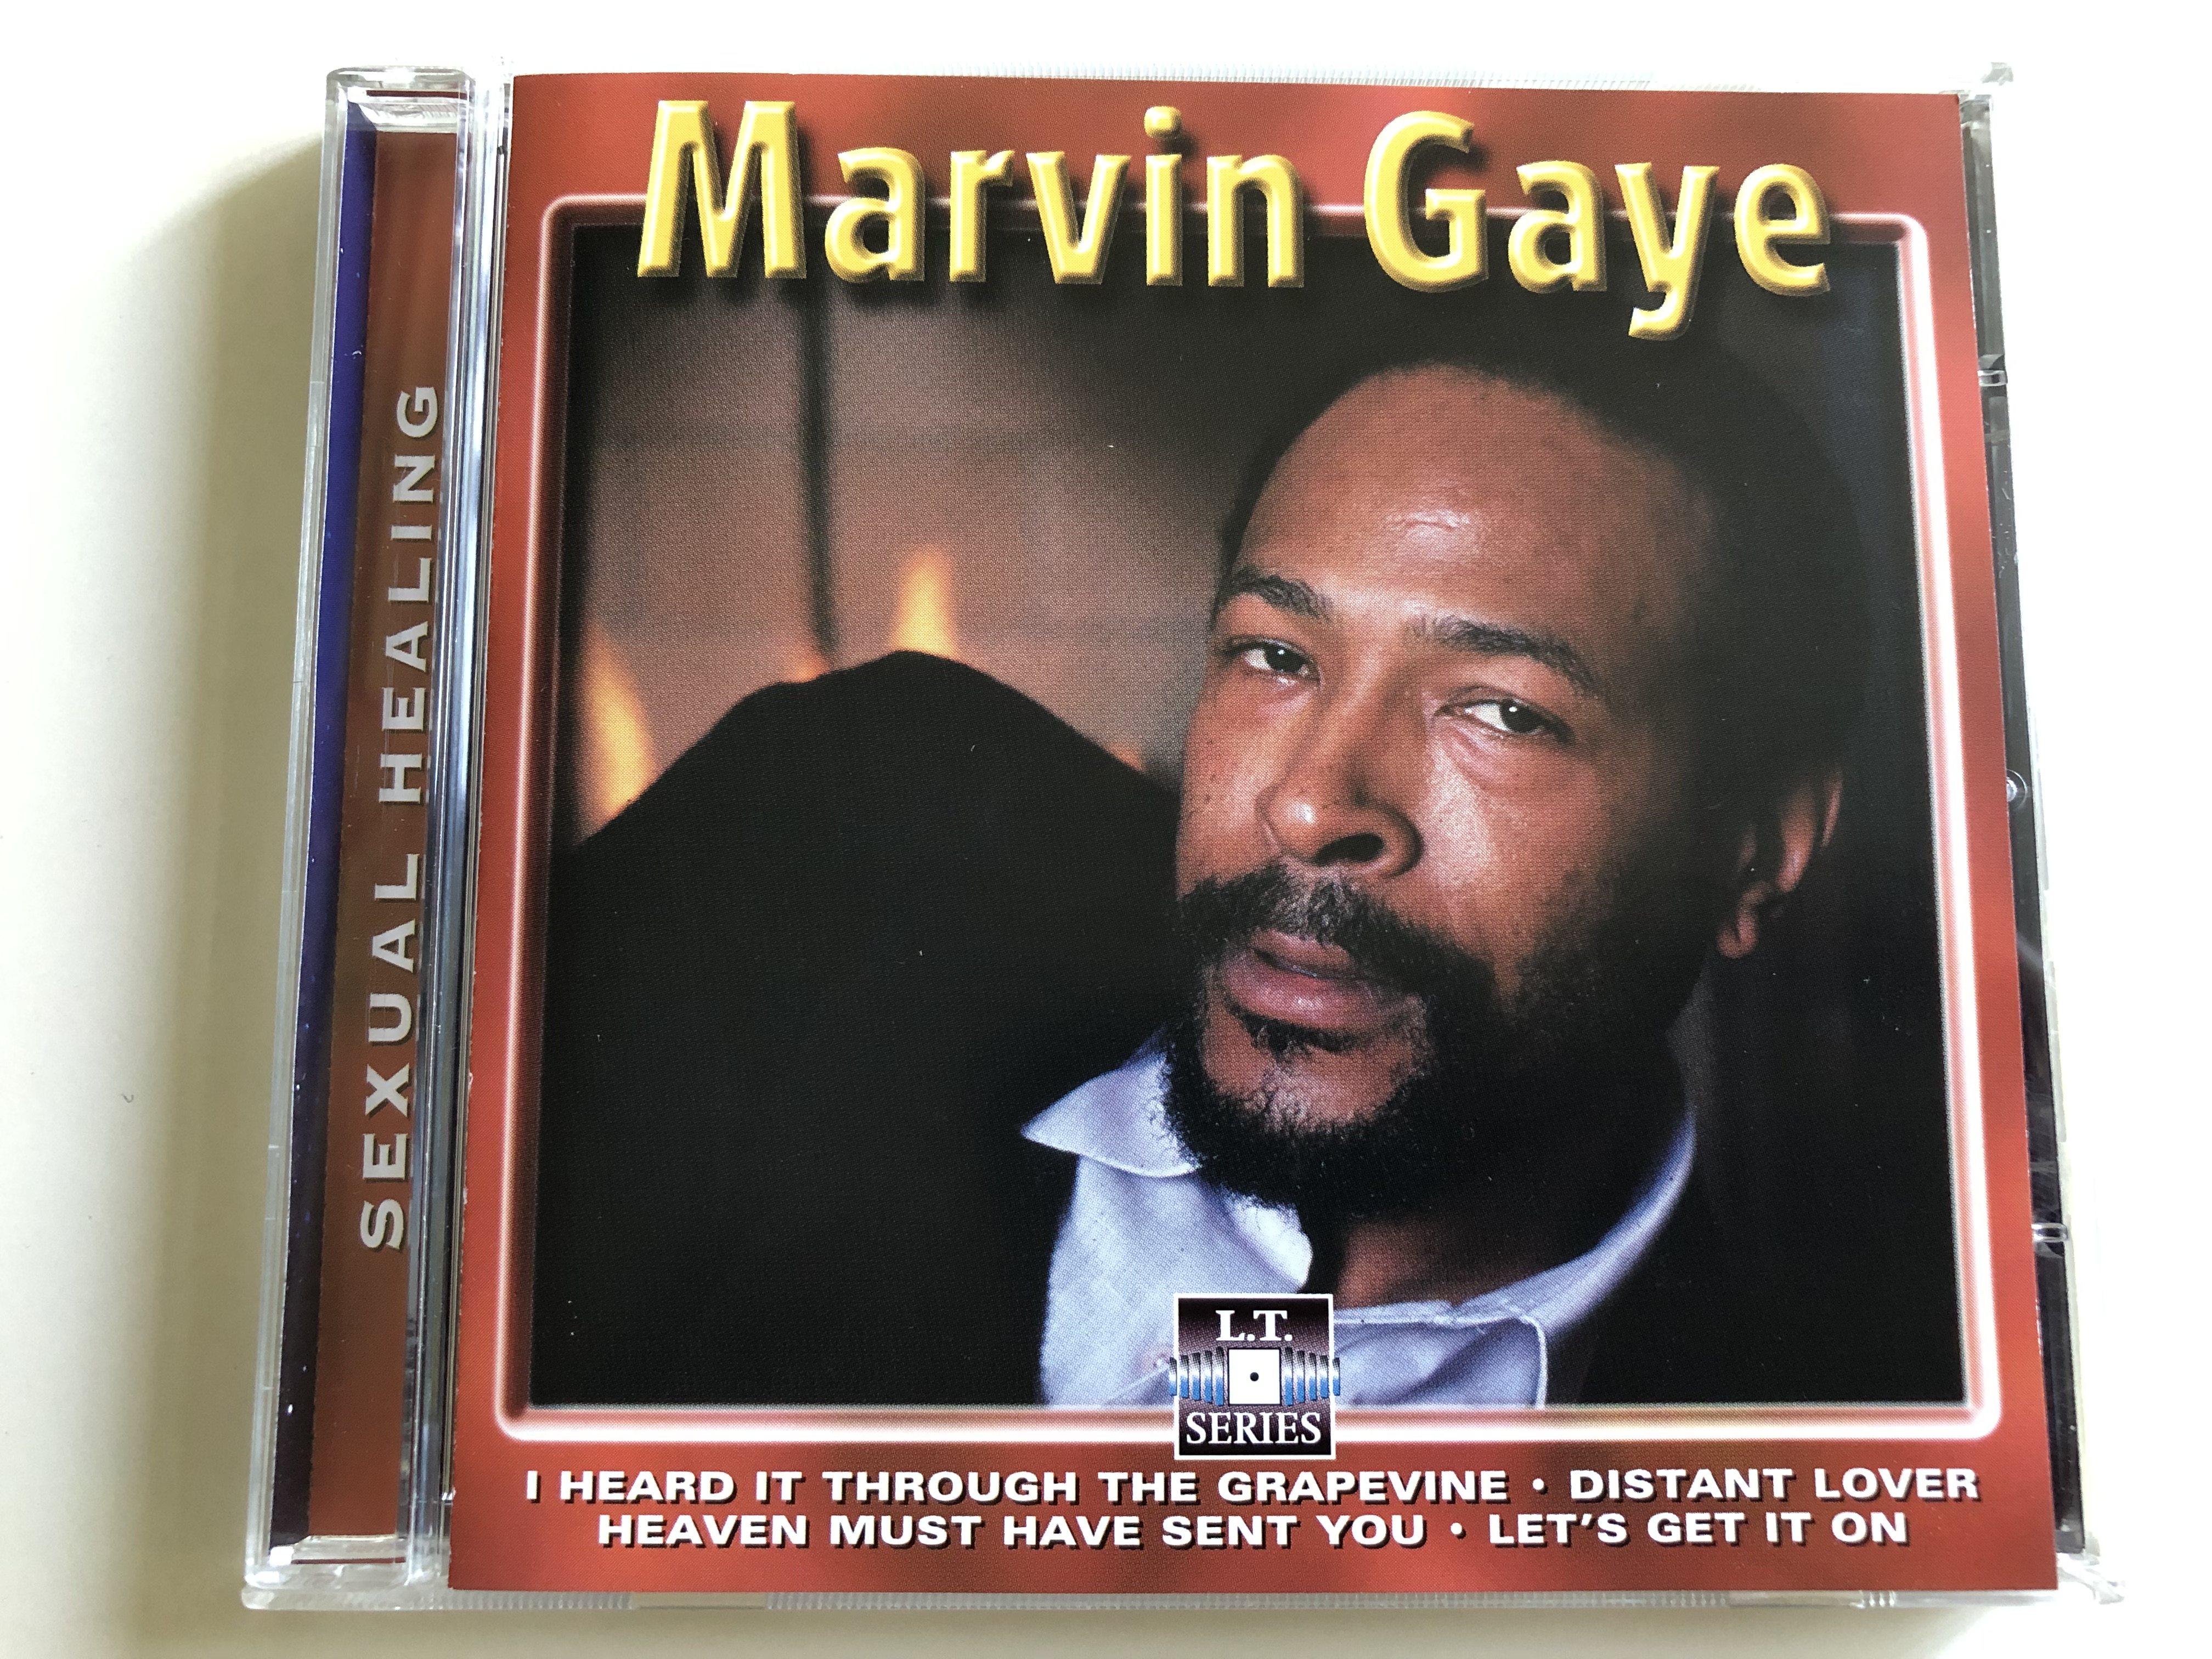 marvin-gaye-sexual-healing-i-heard-it-through-the-grapevine-distant-lover-heaven-must-have-sent-you-let-s-get-it-on-live-recording-audio-cd-lt-5013-1-.jpg